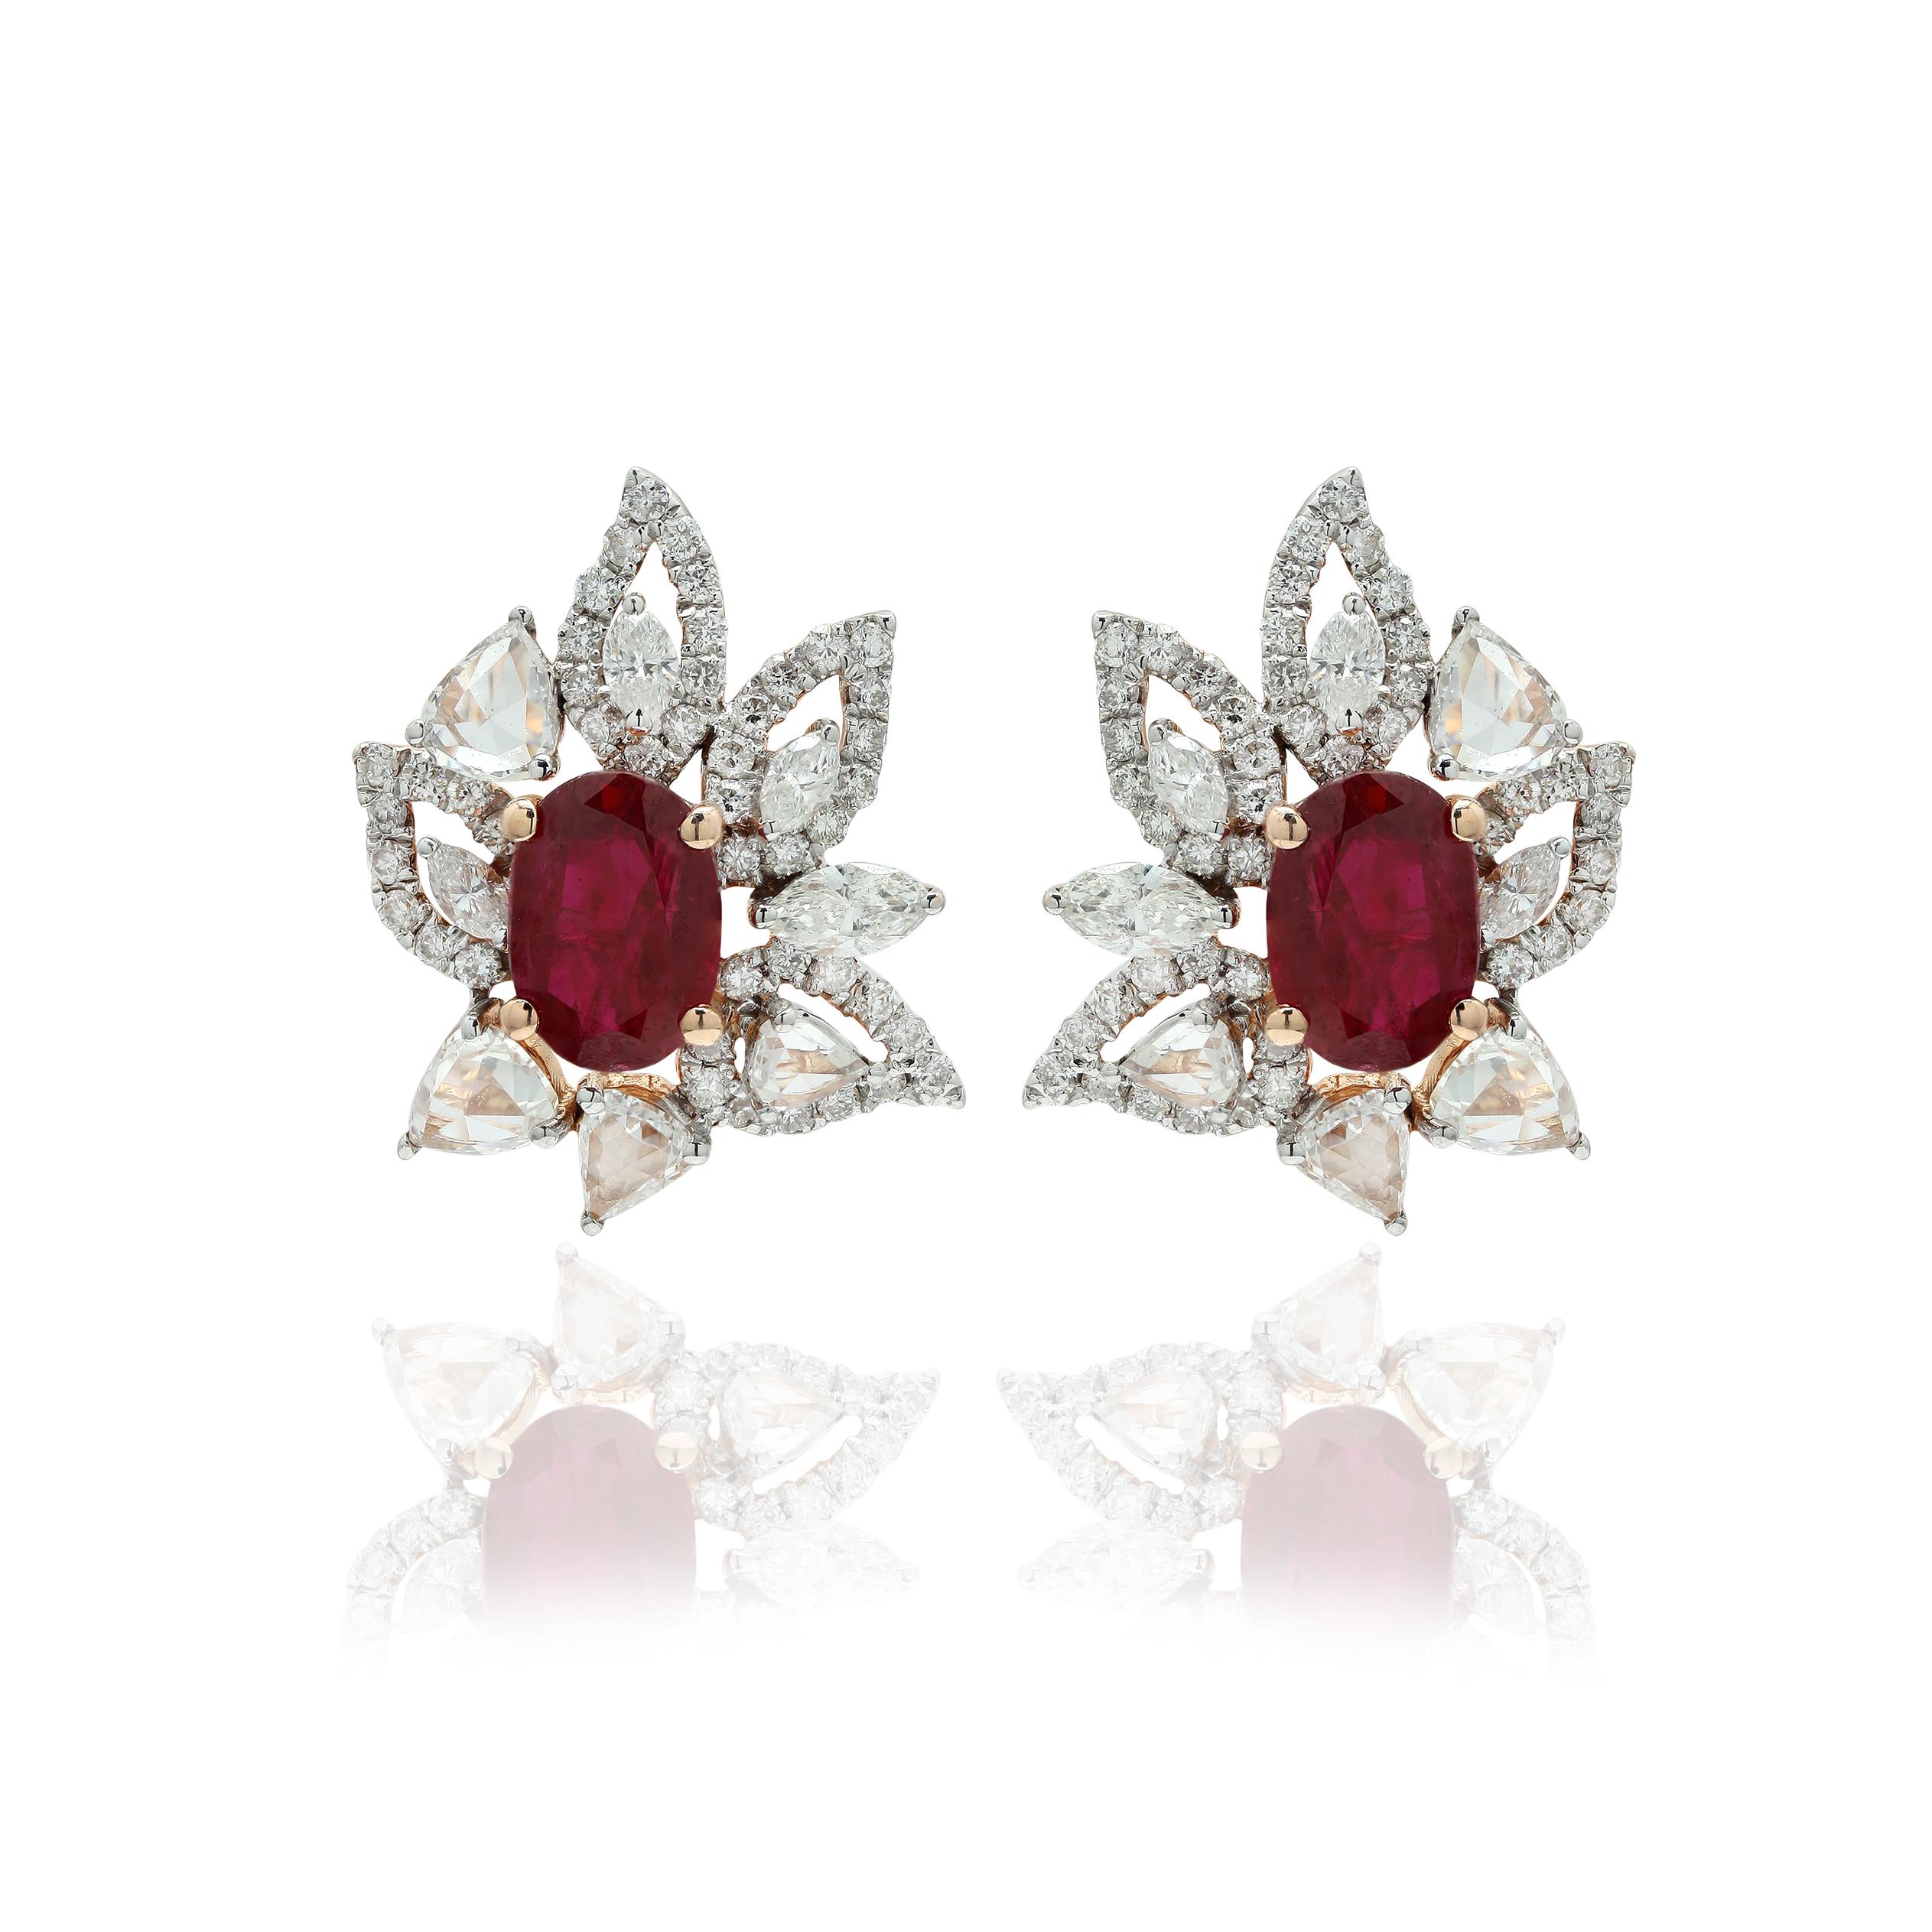 Studs create a subtle beauty while showcasing the colors of the natural precious gemstones and illuminating diamonds making a statement.
Floral ruby with diamonds stud earrings in 14K gold. Embrace your look with these stunning pair of earrings